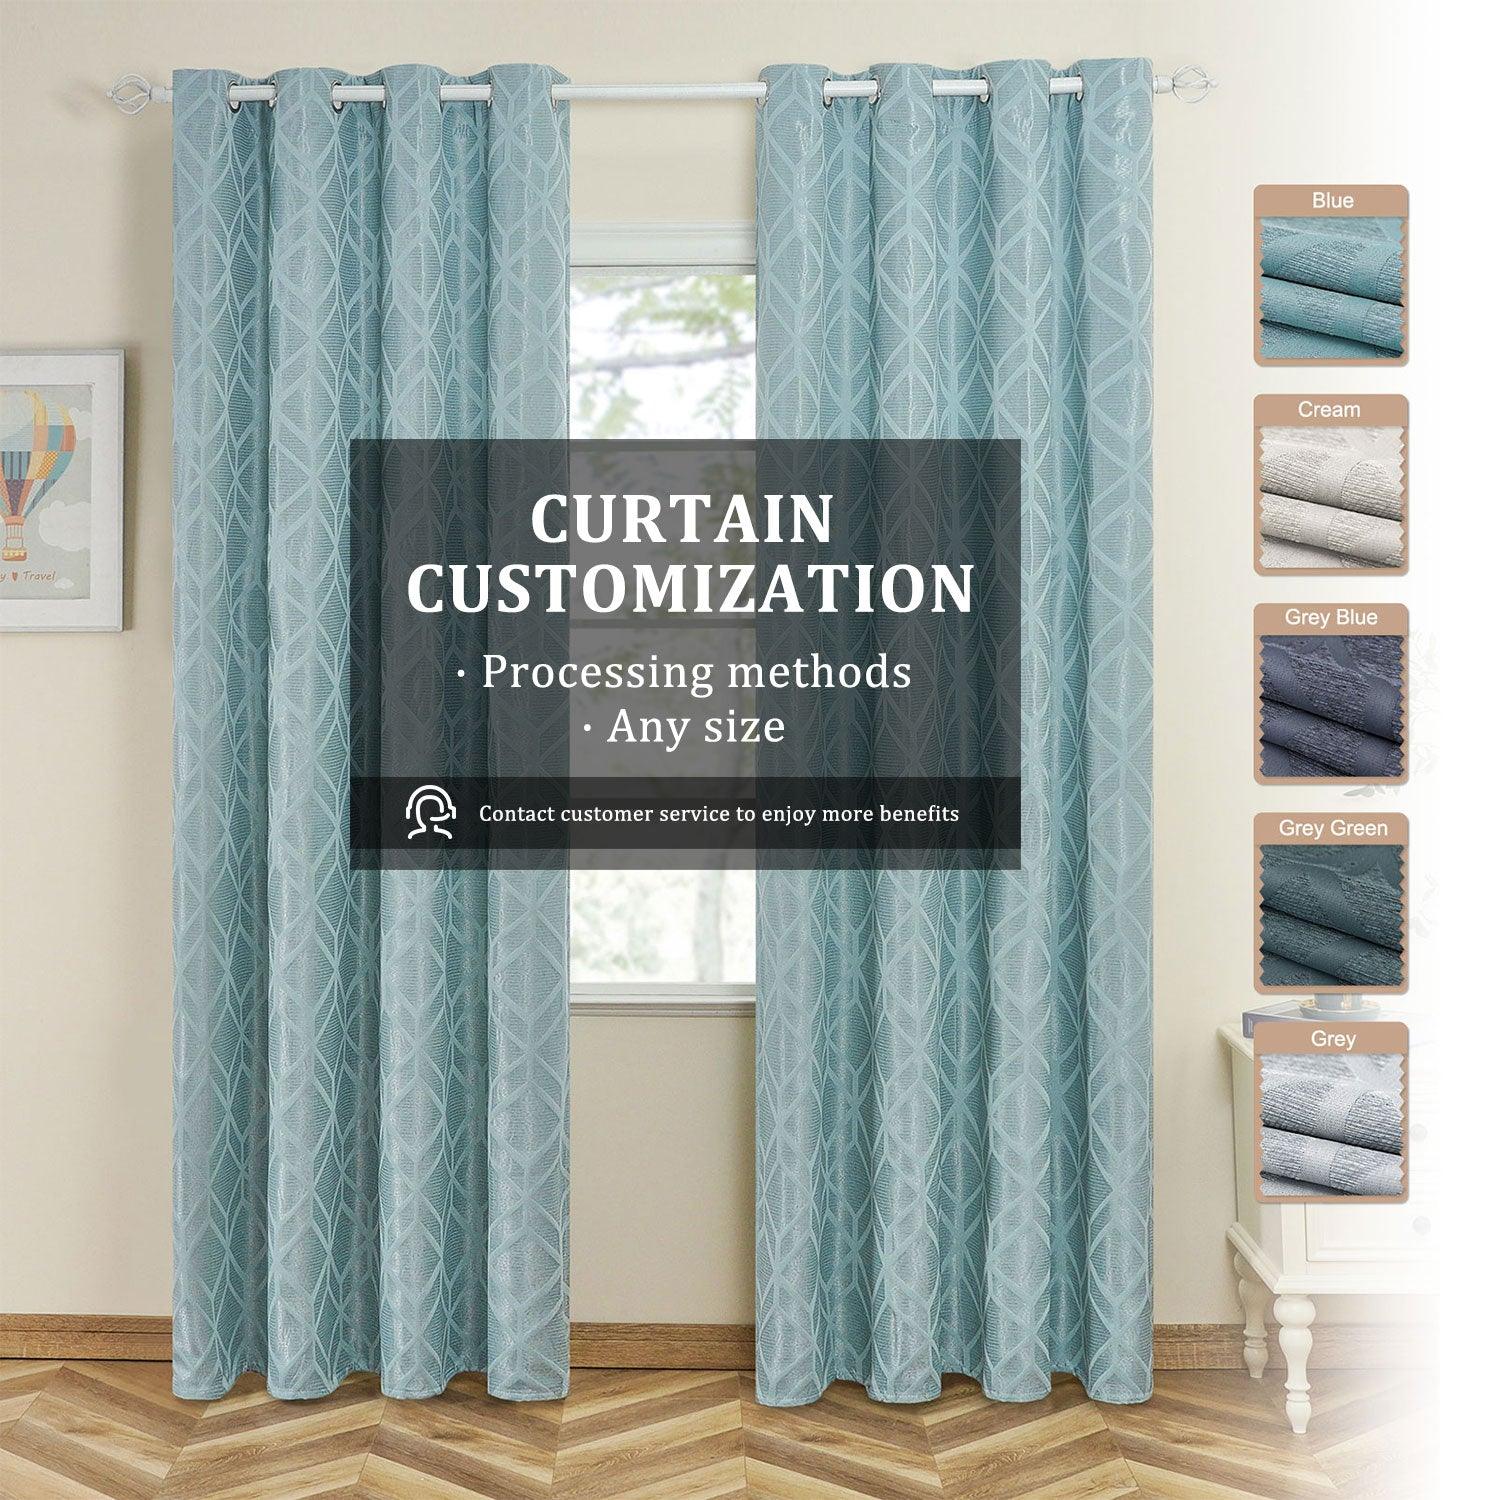 Customized Curtains -Jacquard Blackout Winter Thermal Curtains For Bedroom,1 Panel - Topfinel